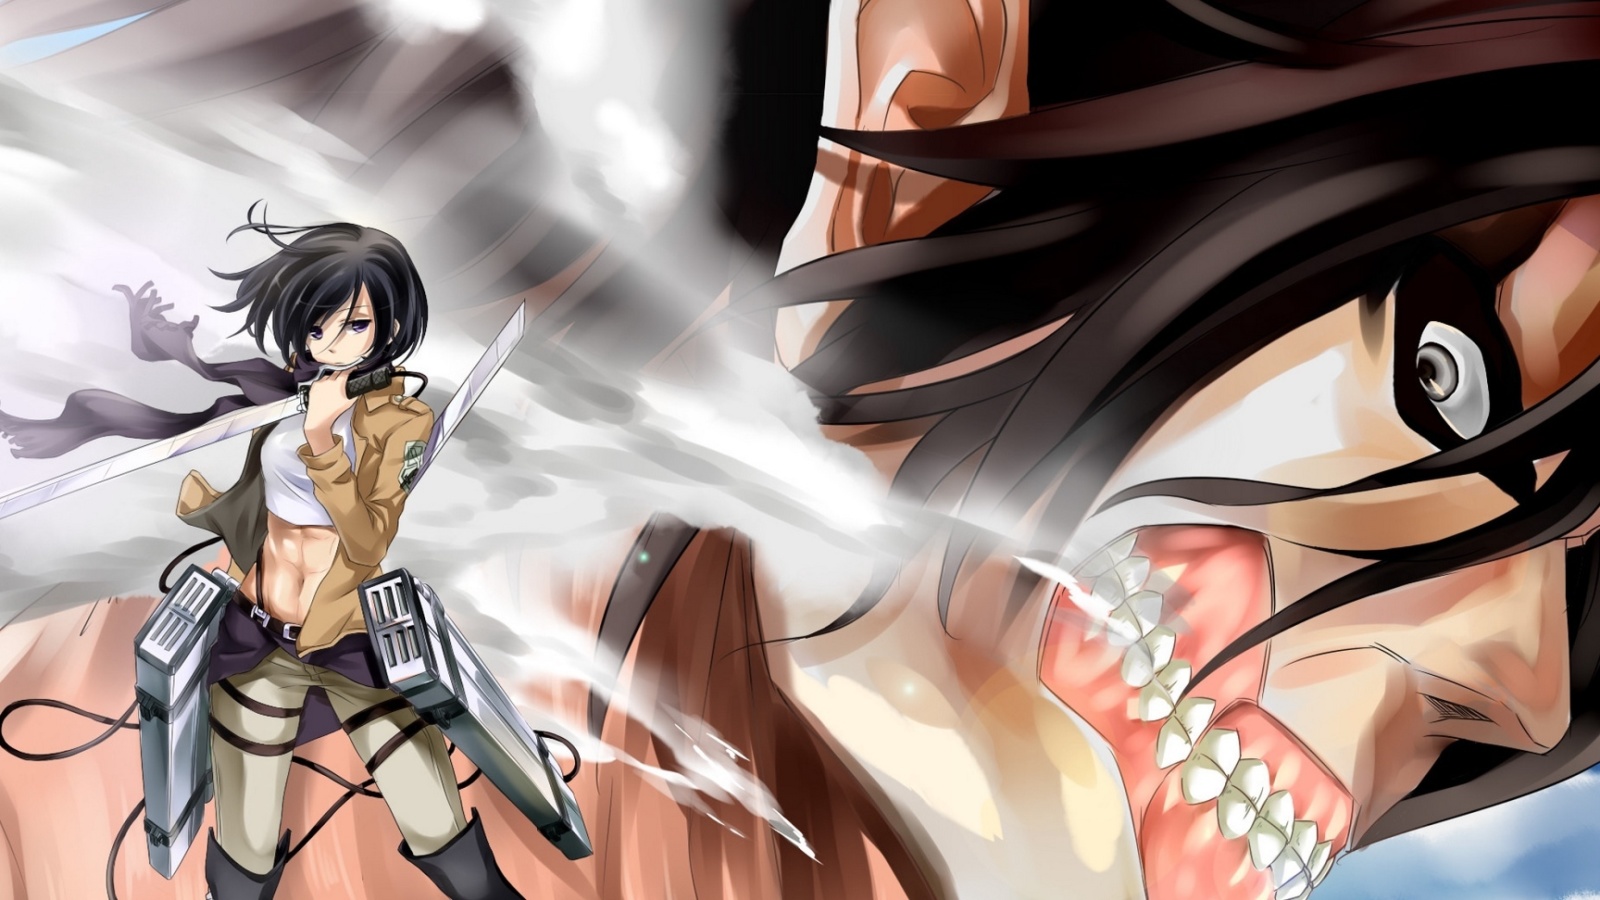 Attack on Titan with Eren and Mikasa screenshot #1 1600x900